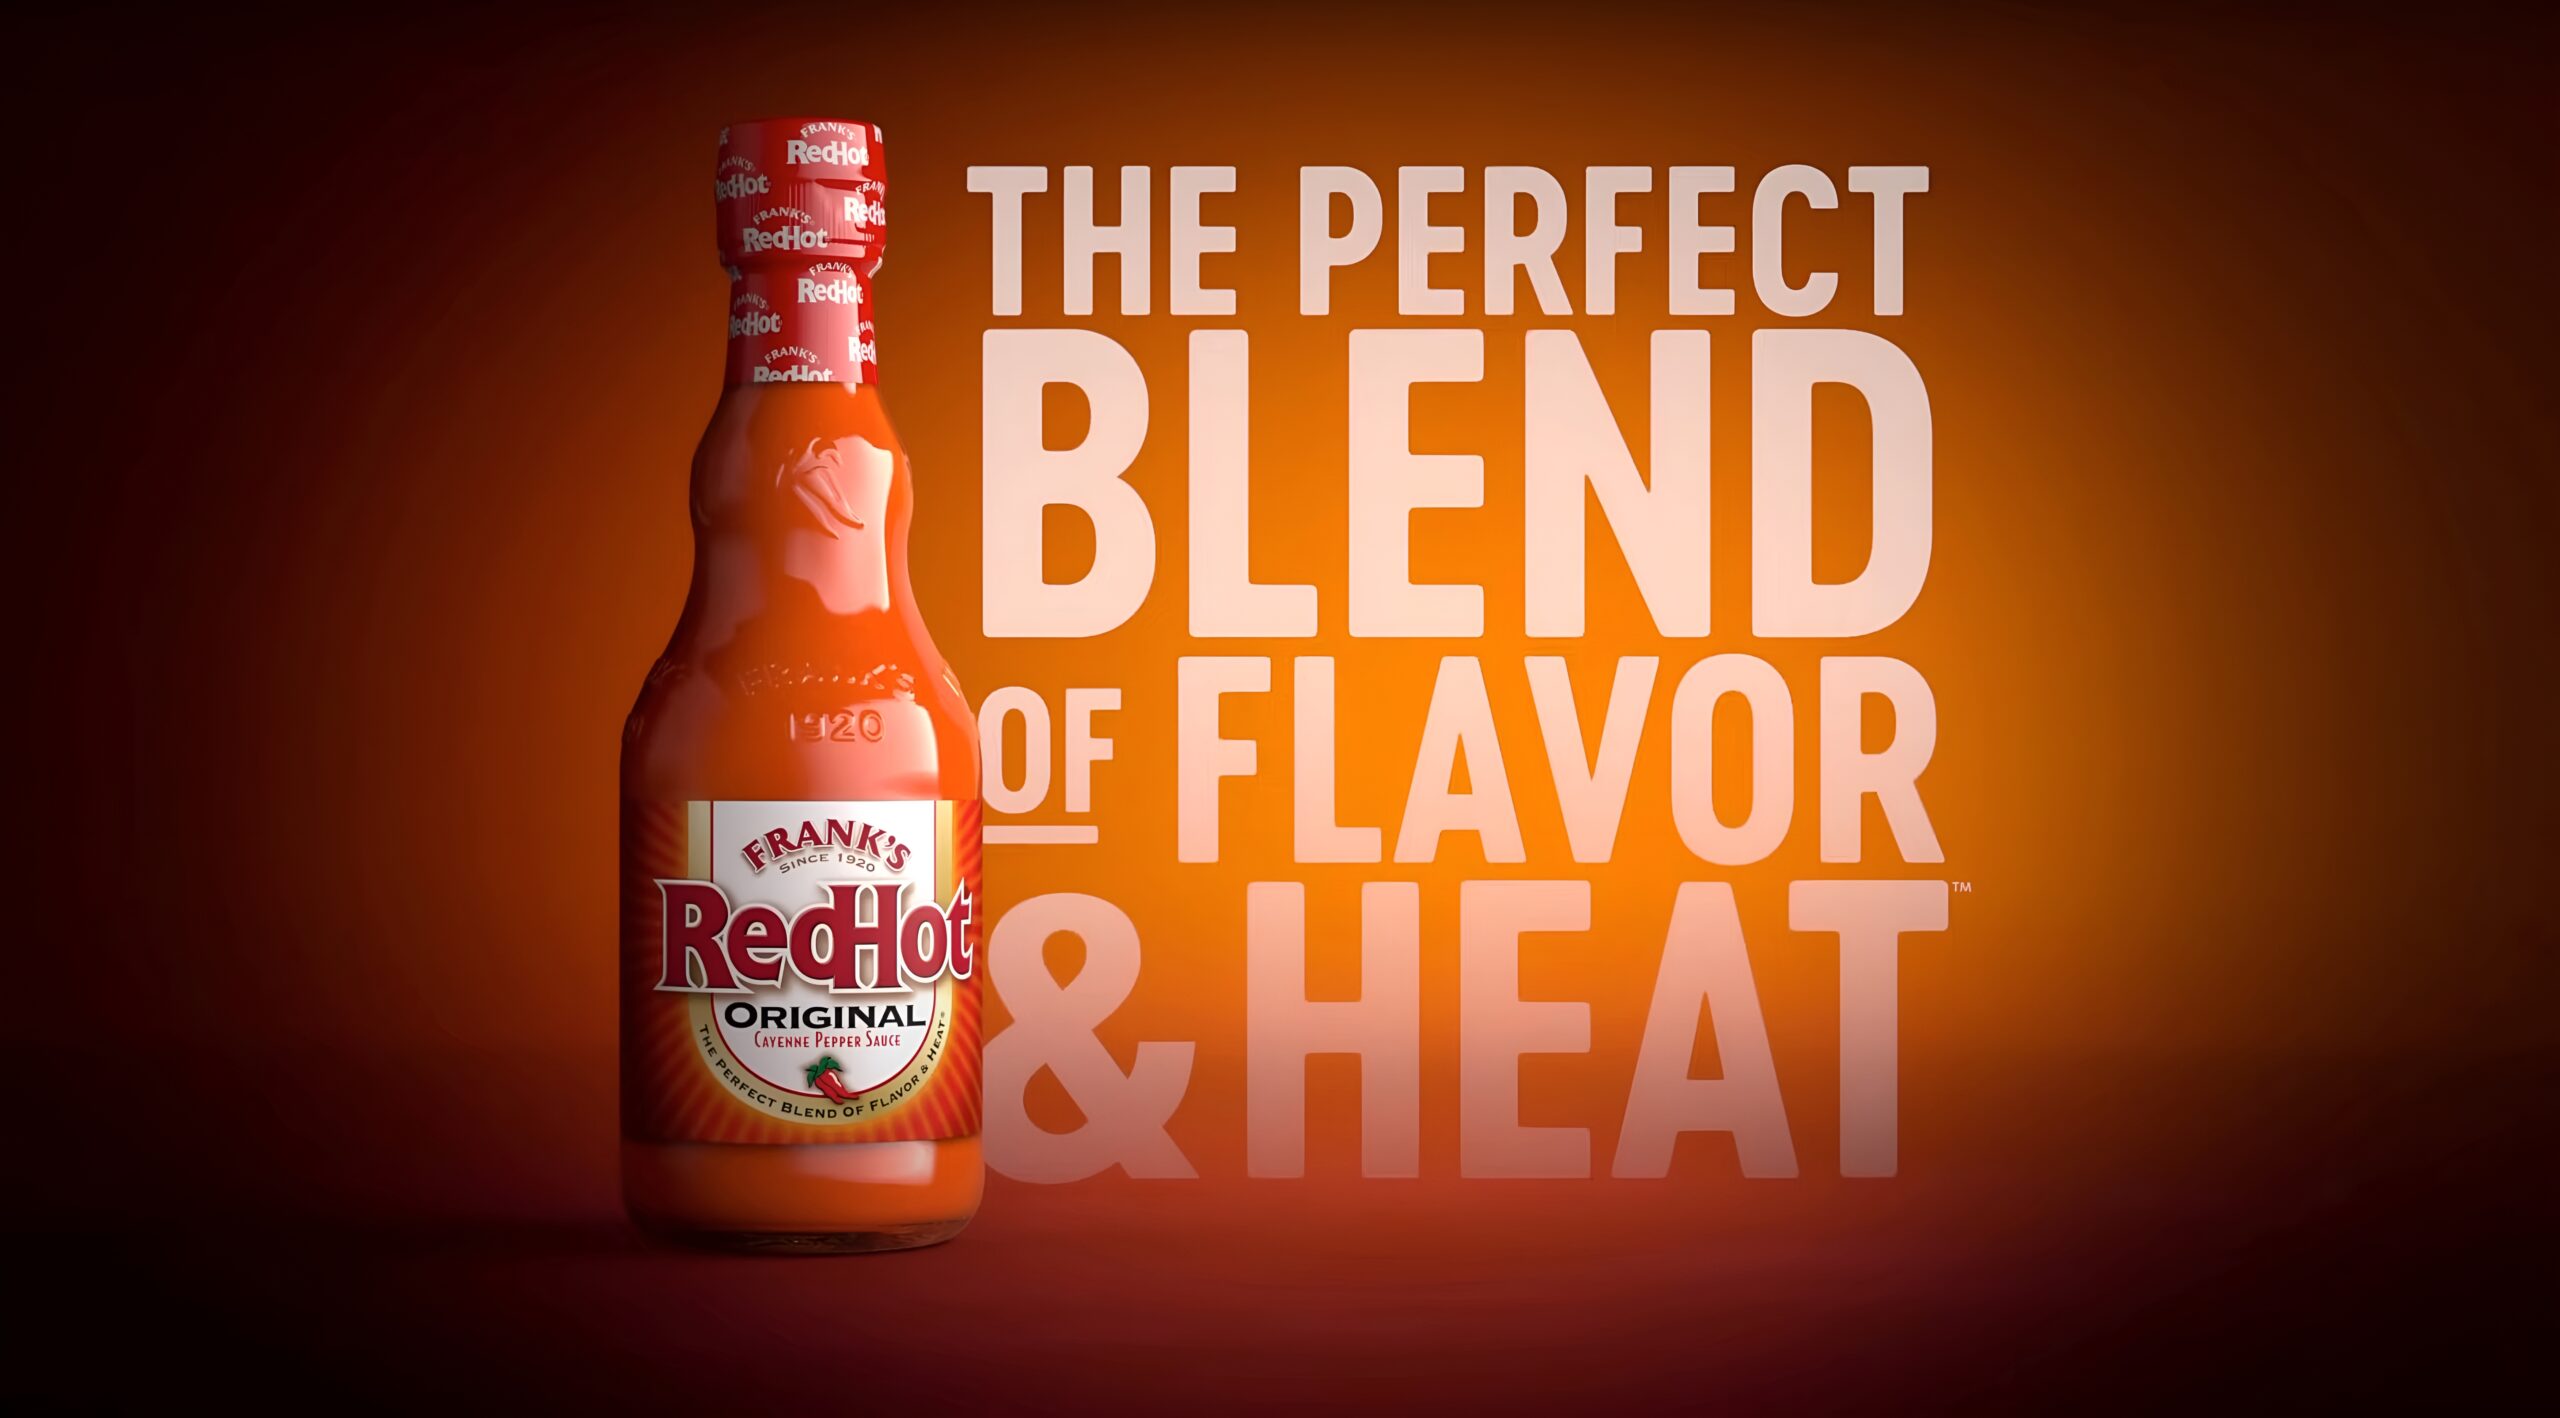 The perfect blend of flavor and heat.